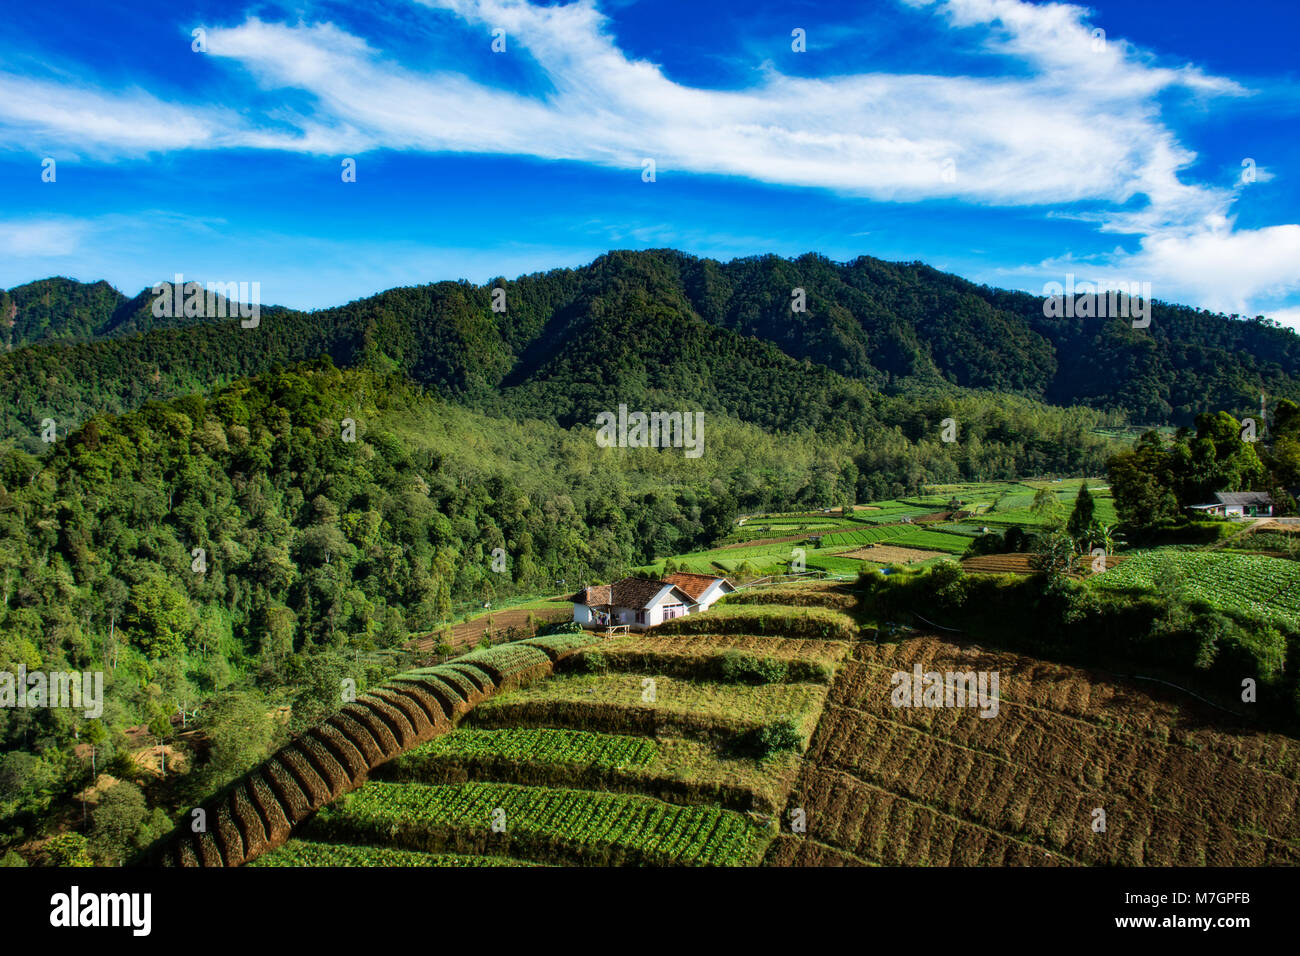 The beautiful green hill with small farm house at Batu, Indonesia. Stock Photo